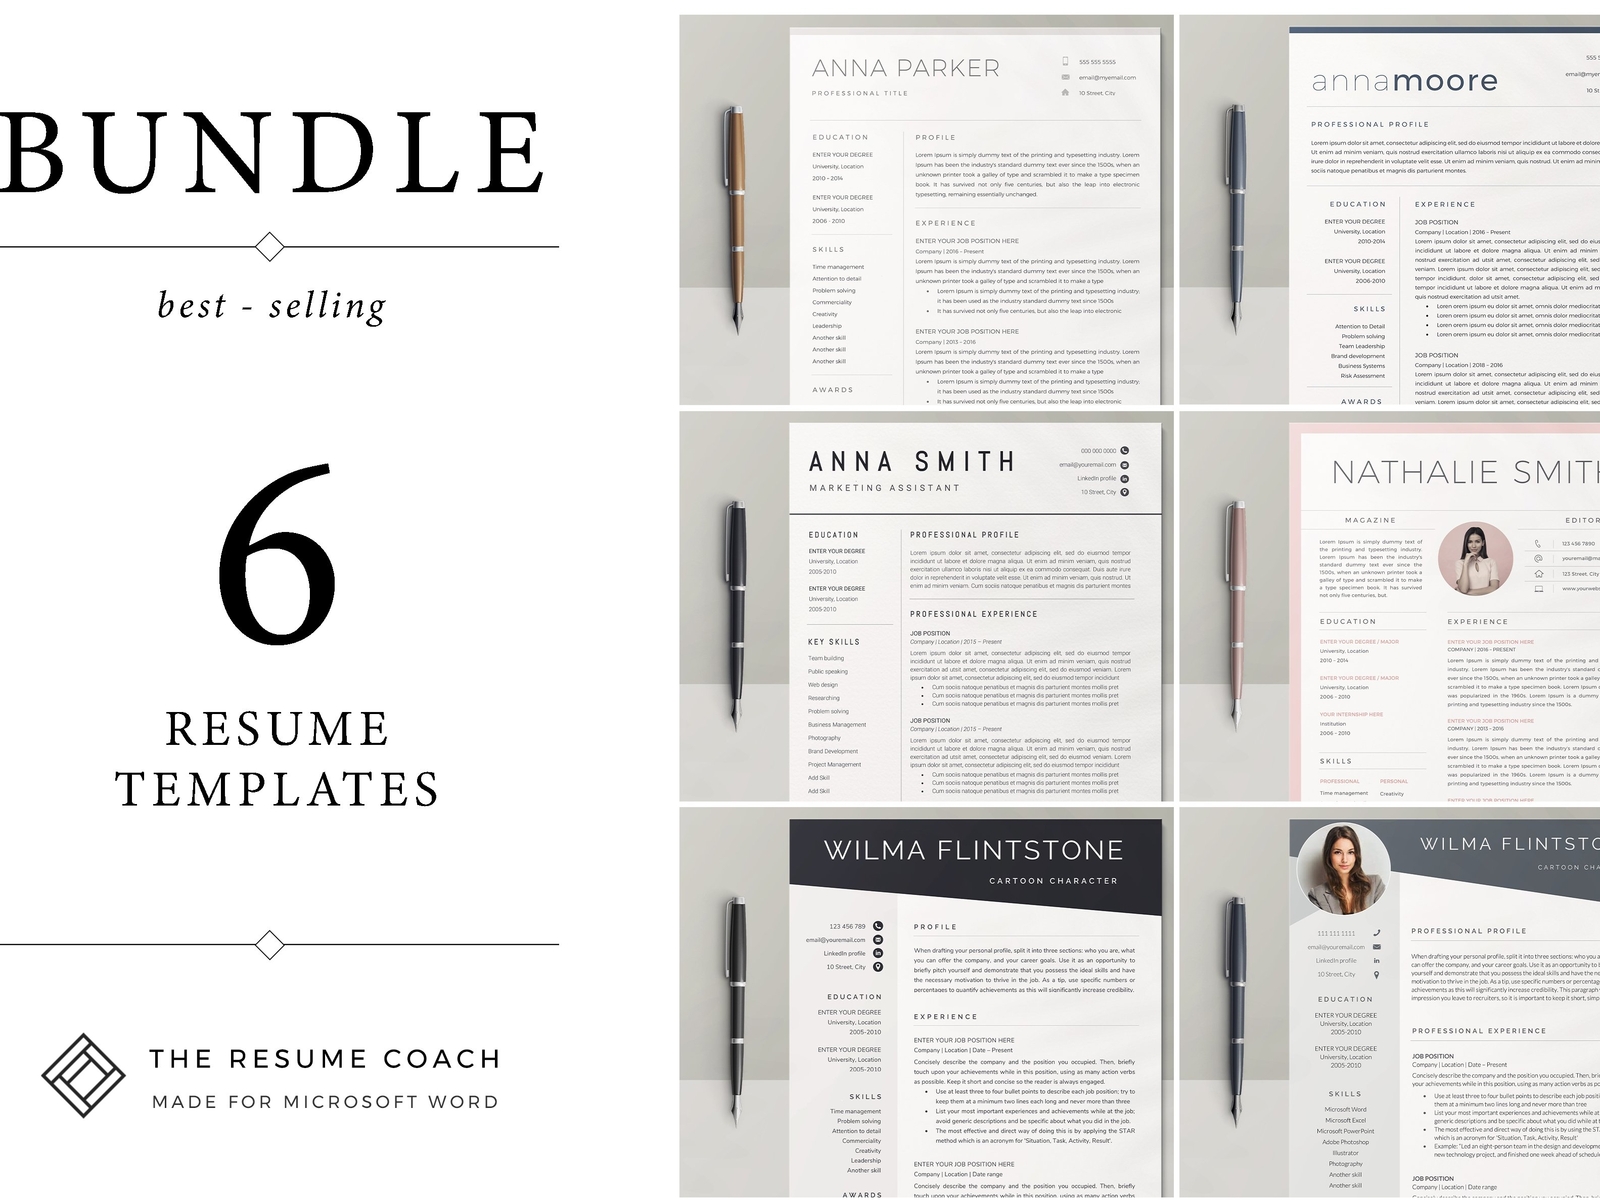 shutterstock resume templates for free